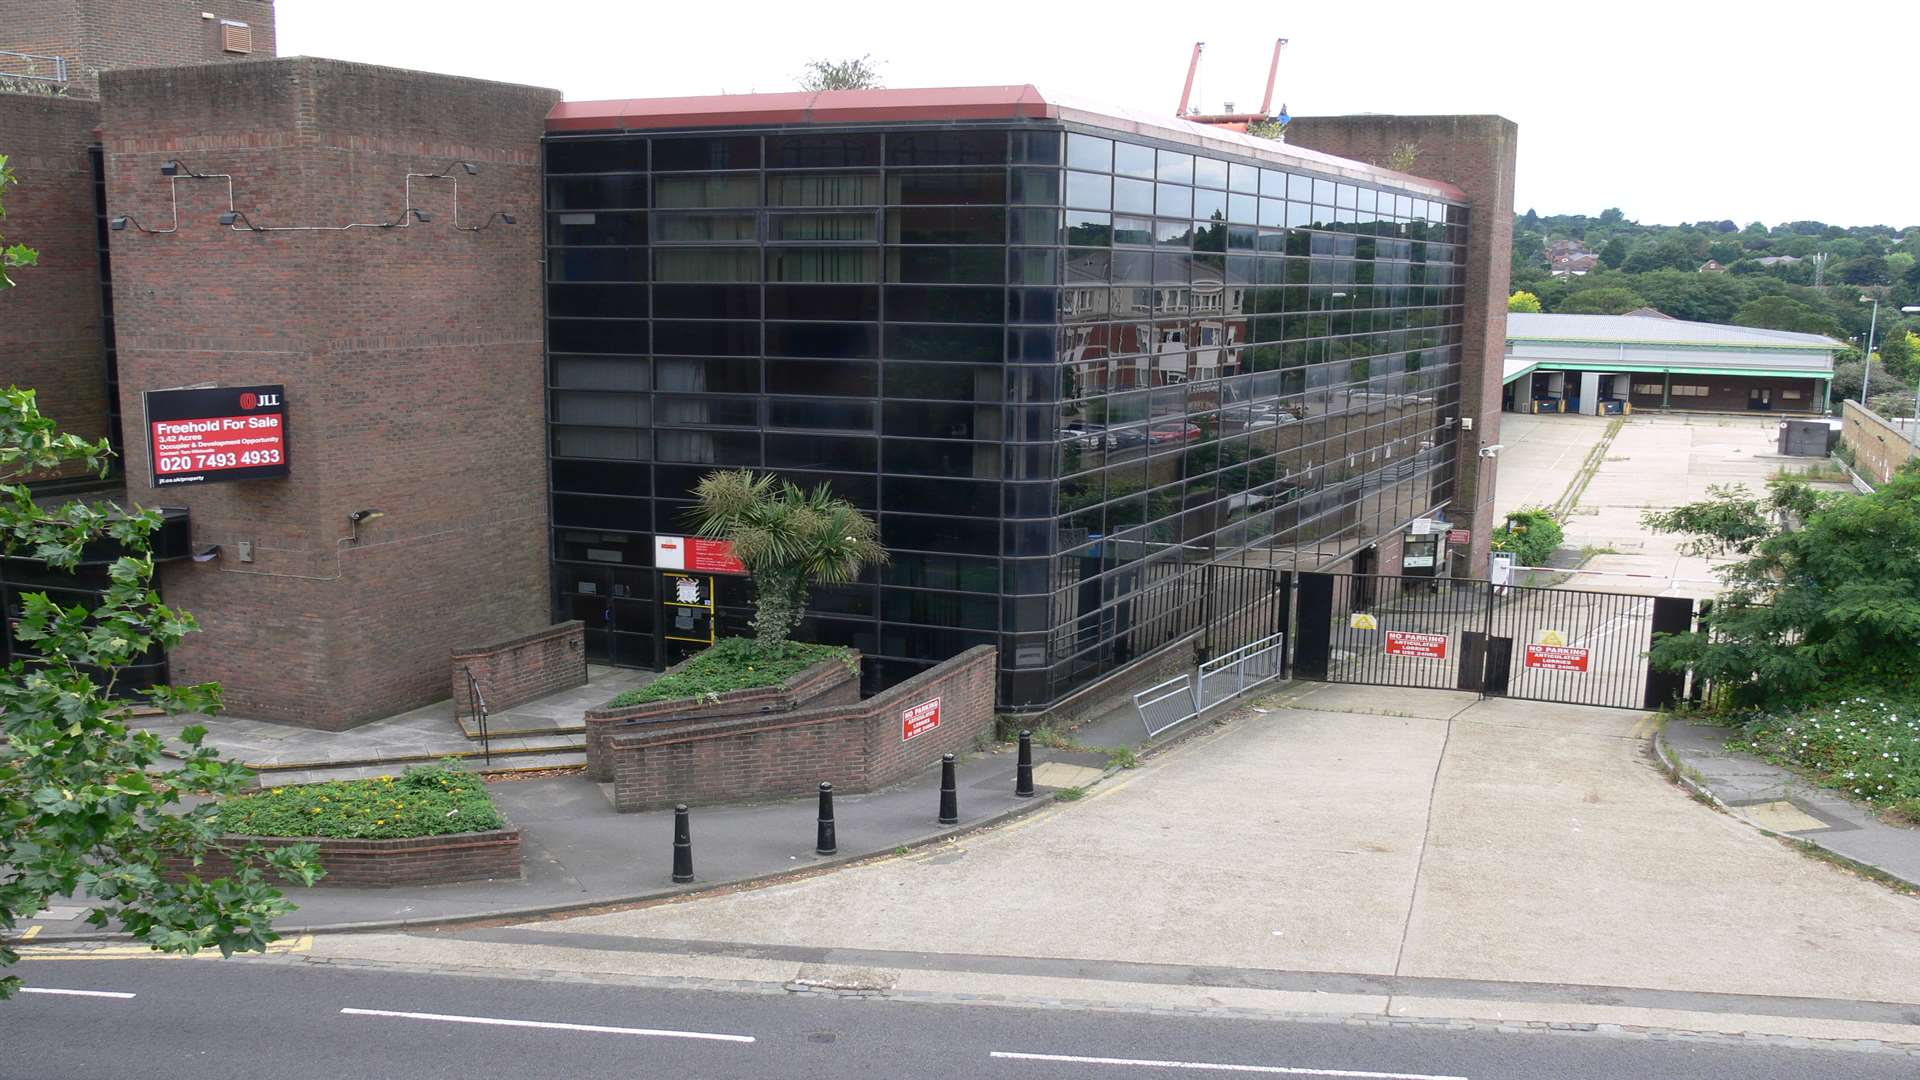 The former Post Office site